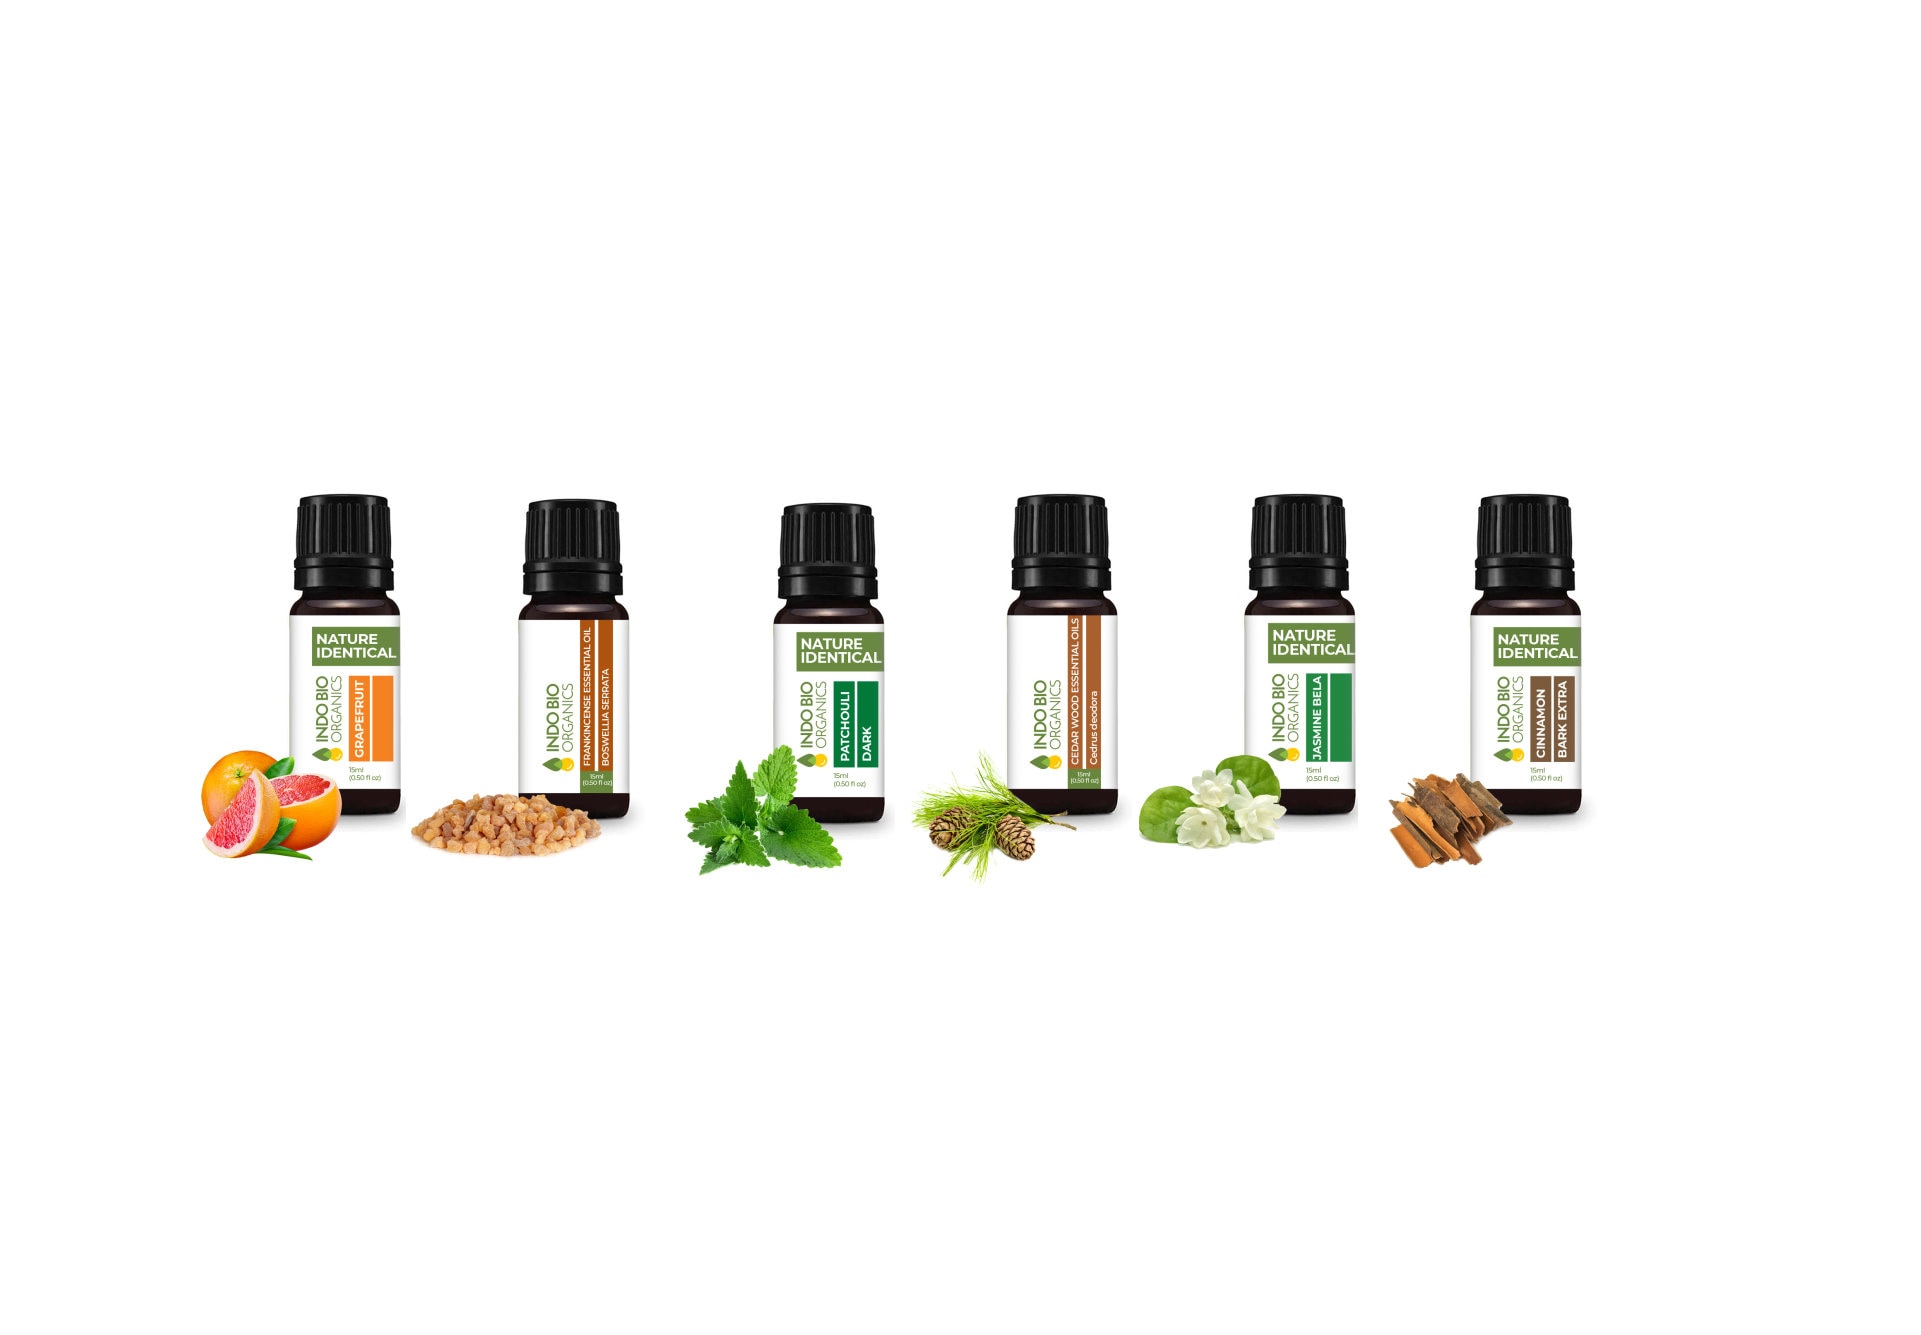 Premium Floral Oils Collection Floral Essential Oils and Absolutes